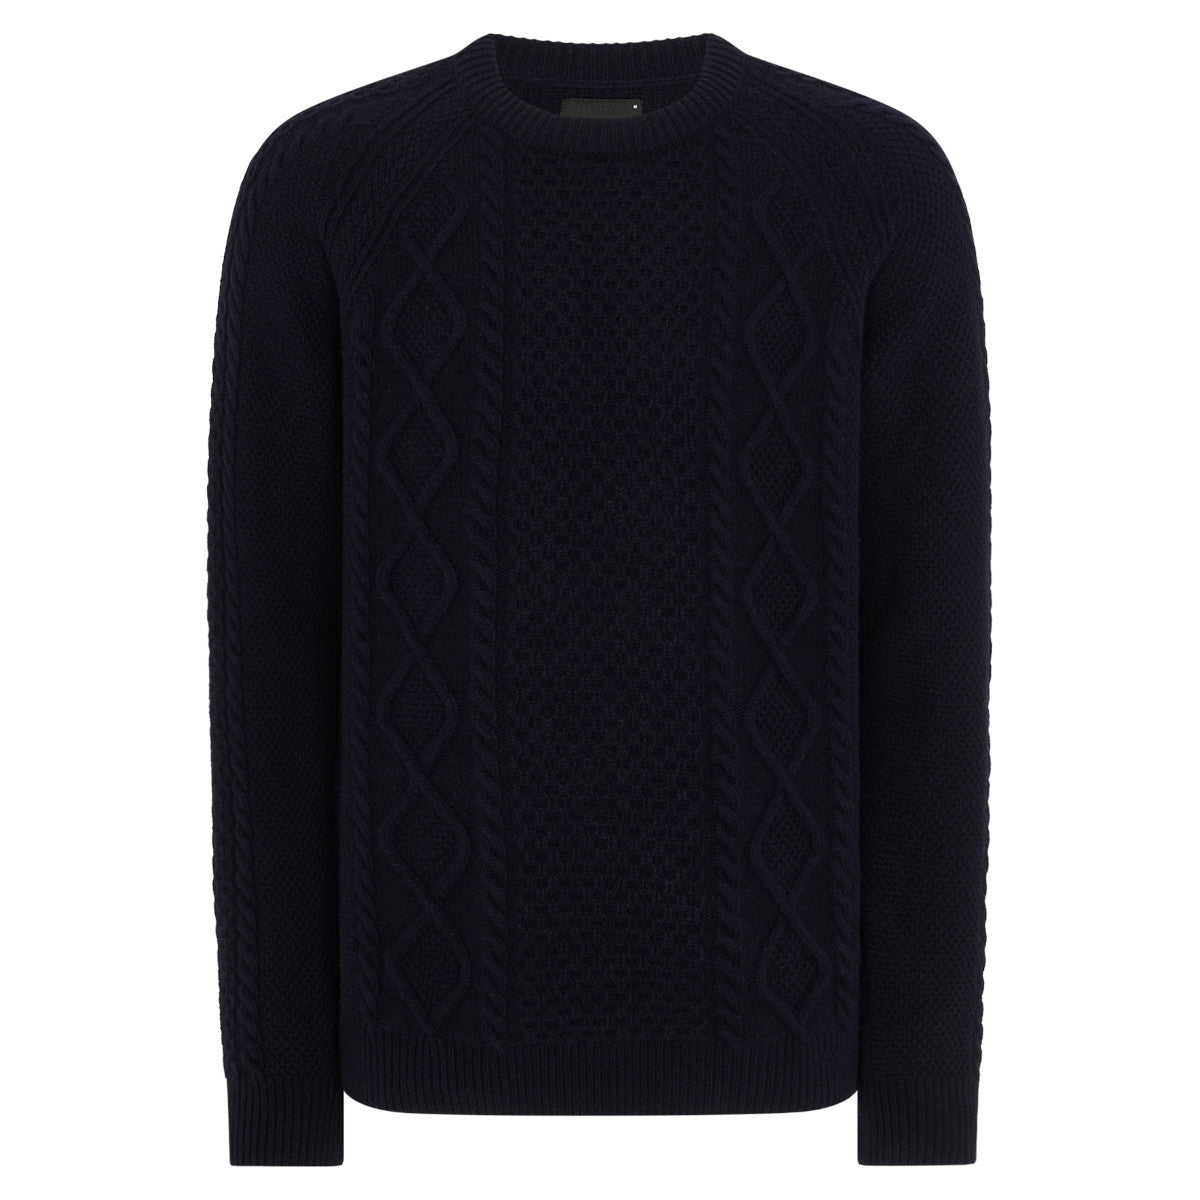 Remus Uomo Cable Knit 78 Navy